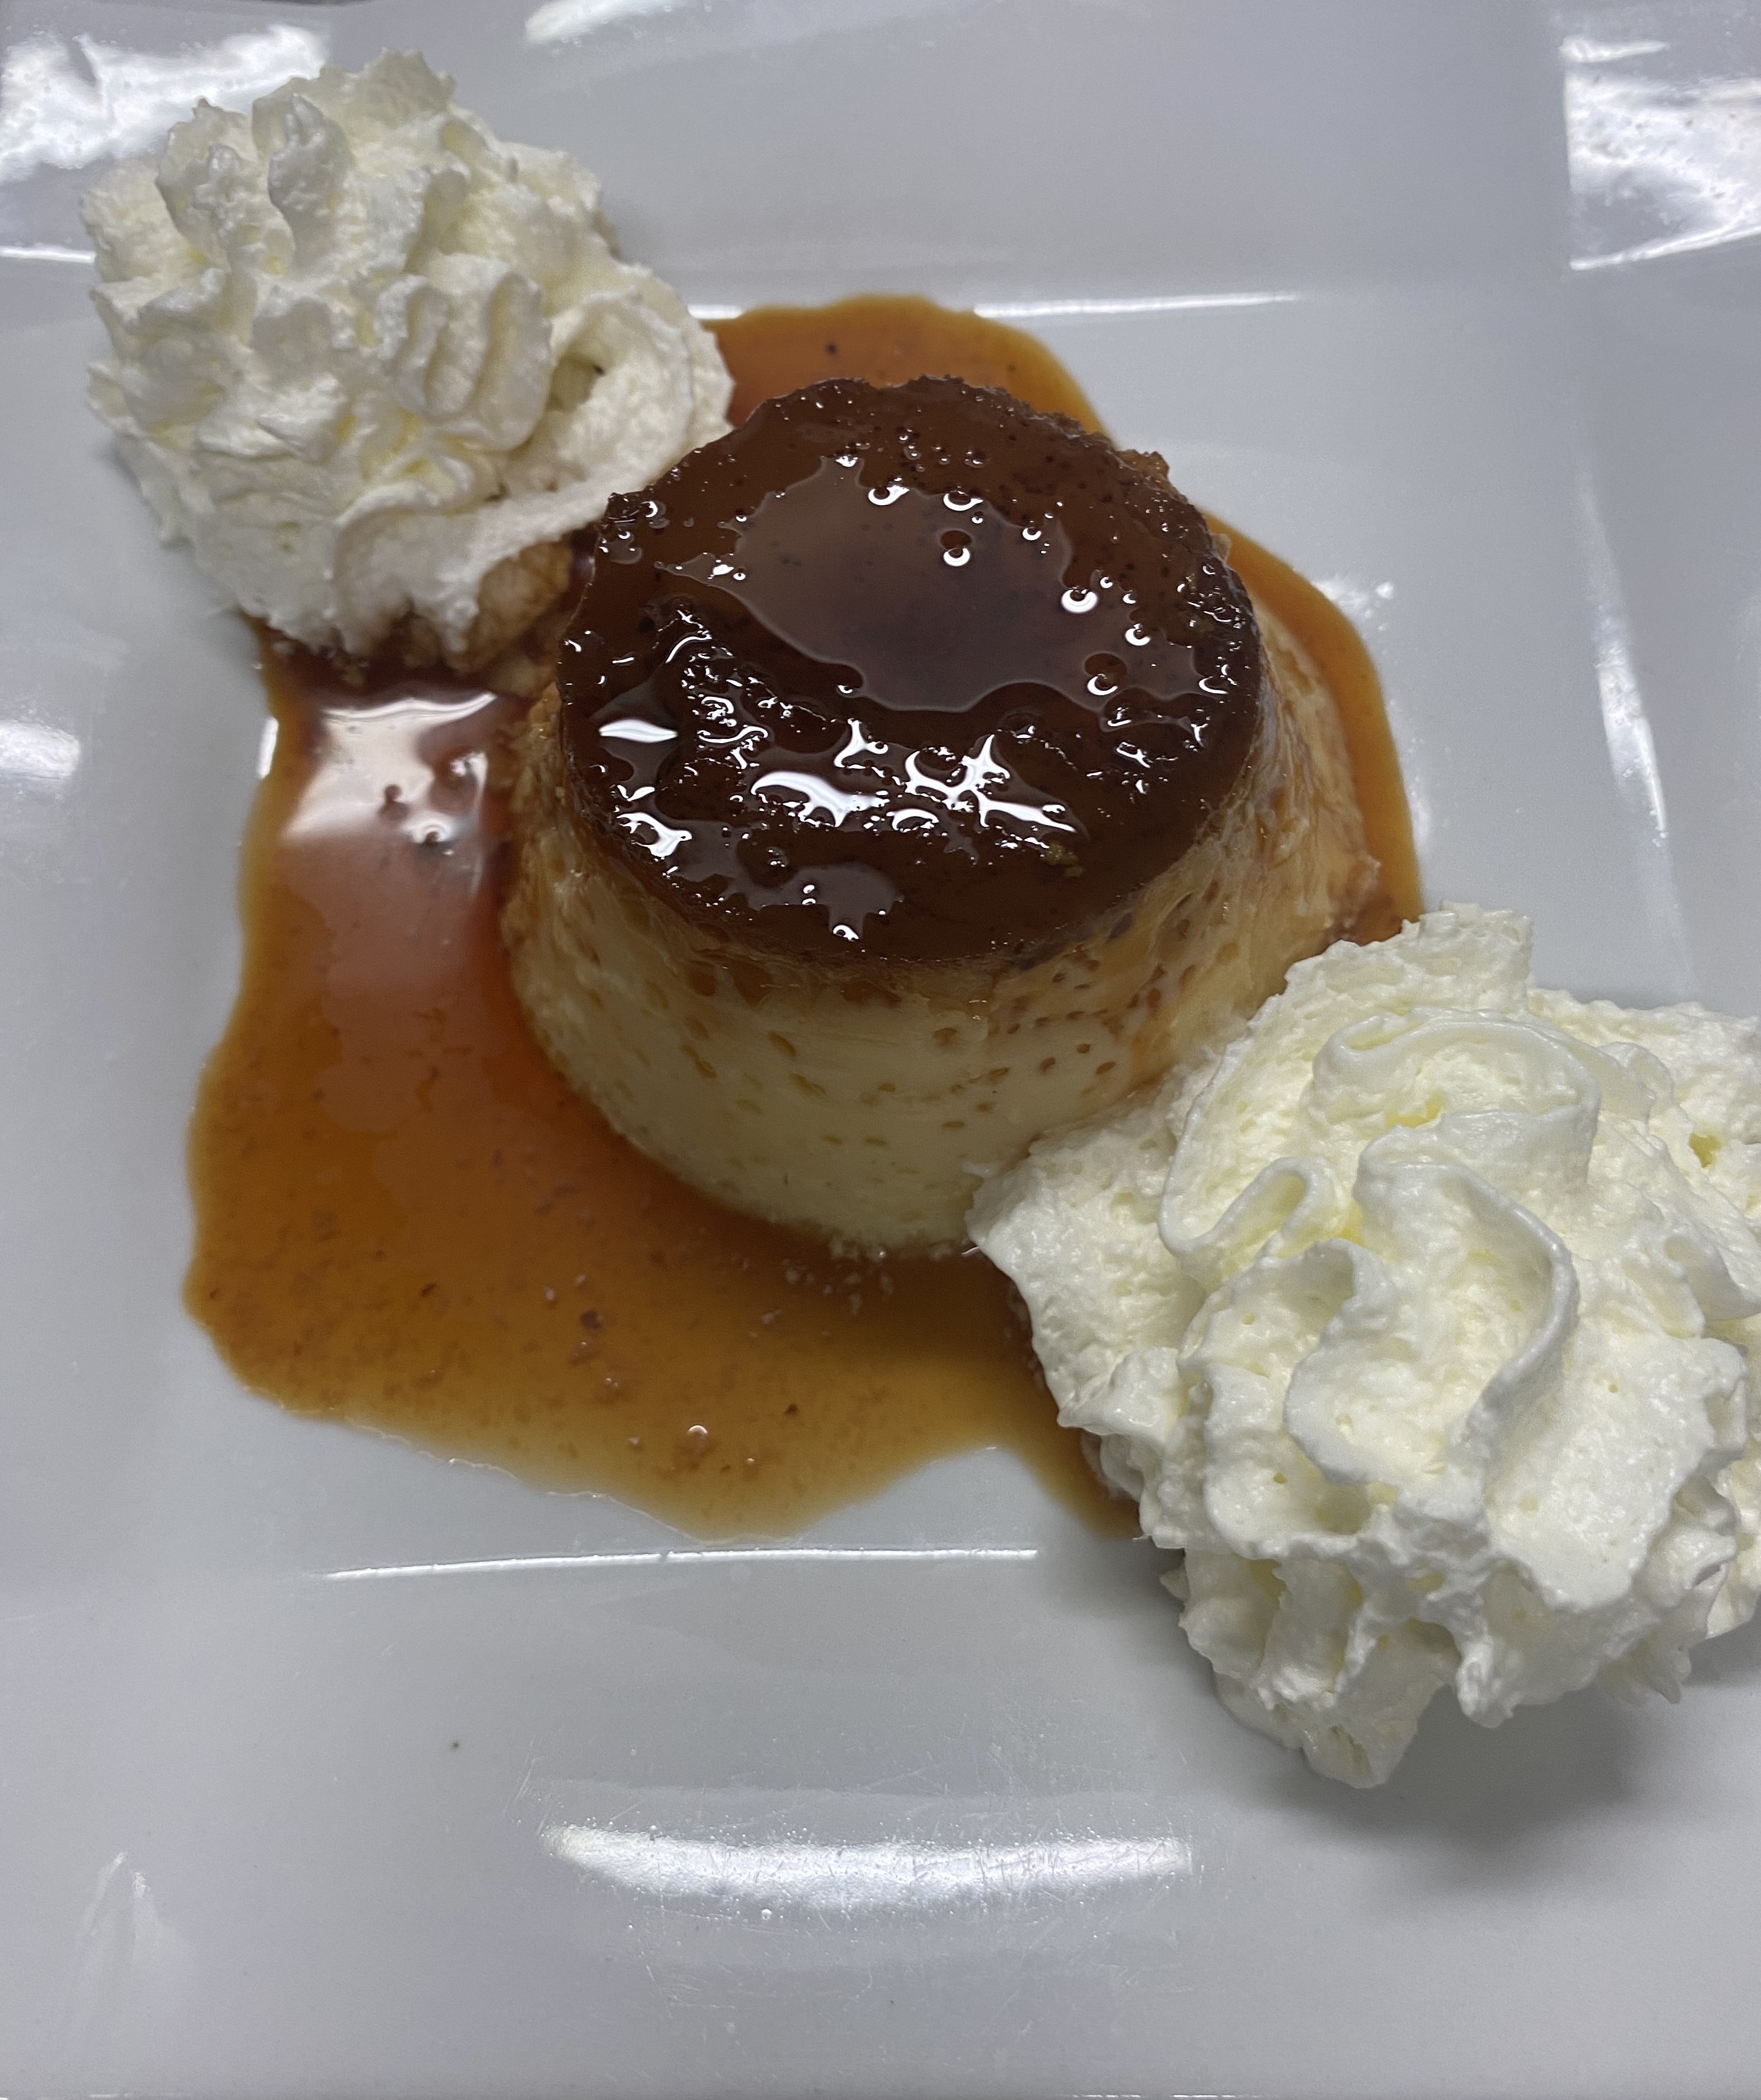 HOUSE FLAN WITH CREAM